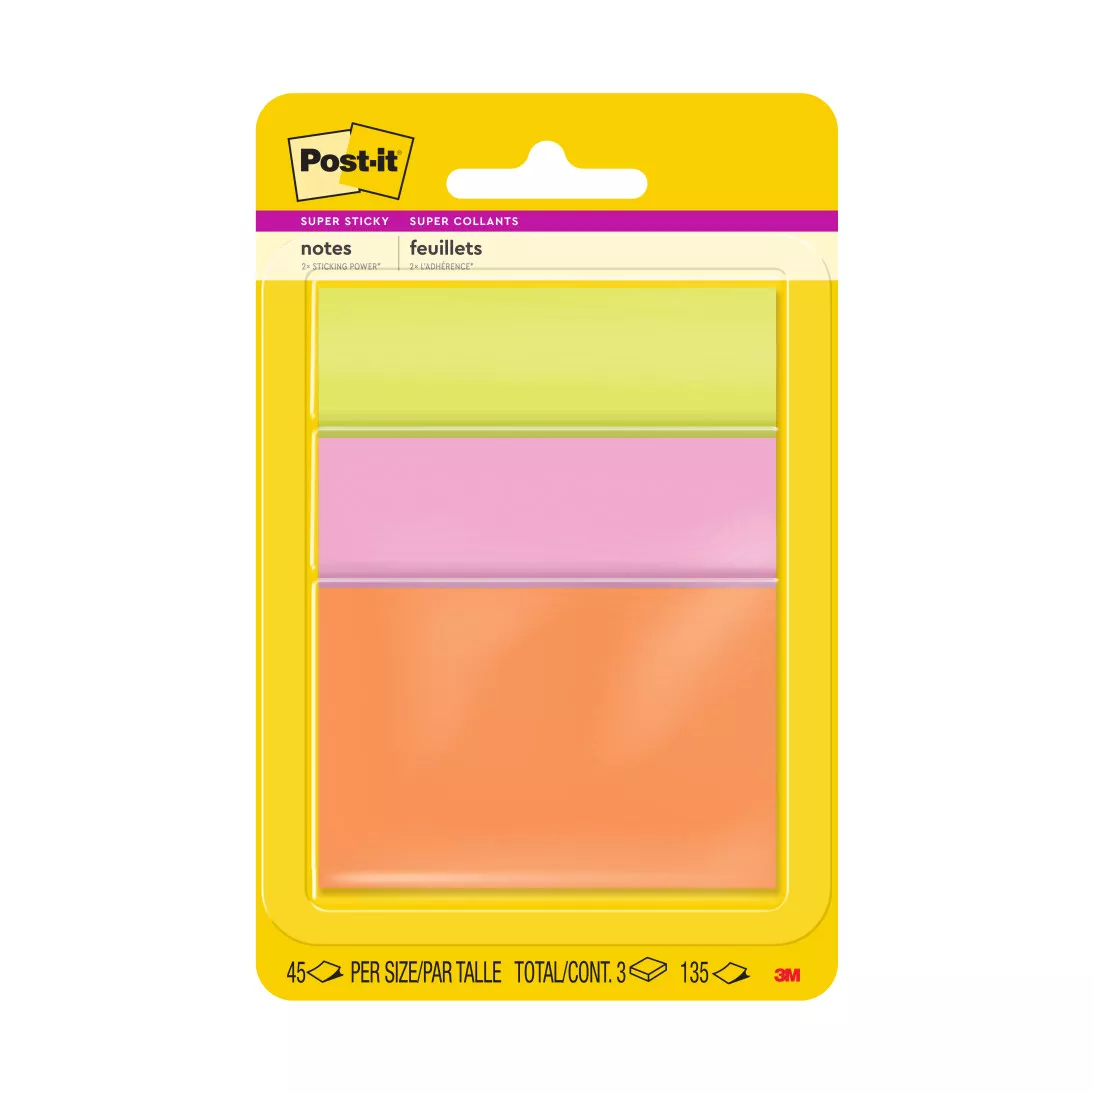 Post-it® Super Sticky Notes 3432-SSAU, 3 in x 3 in (76 mm x 76 mm) Rio
de Janeiro Collection